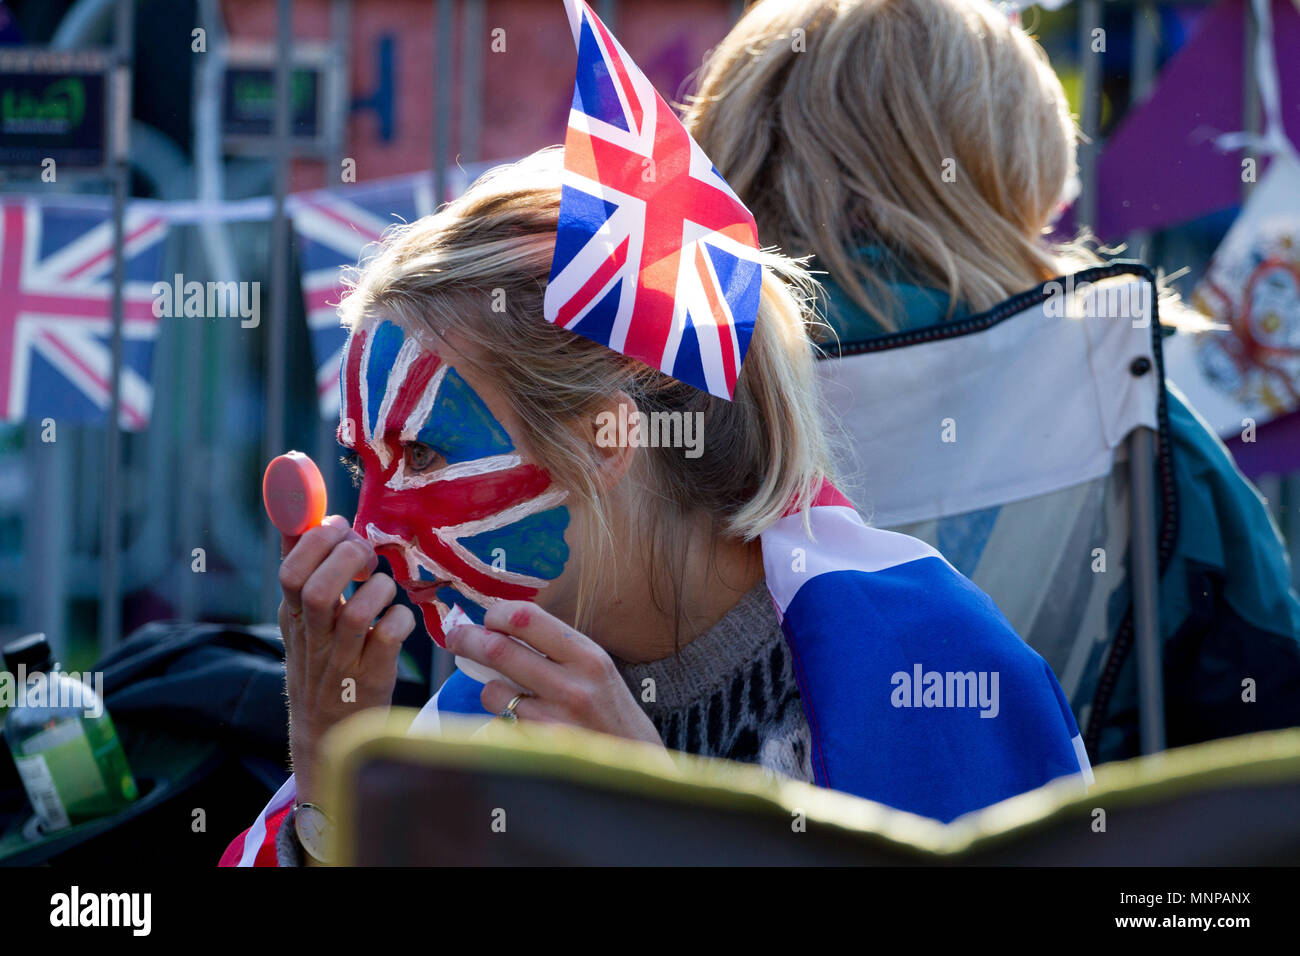 Windsor, Bershire, UK. 19th May, 2018. A woman applies face paint ahead of the wedding procession of Prince Harry and Meghan Markle. Credit: Michael Candelori/ZUMA Wire/Alamy Live News Stock Photo